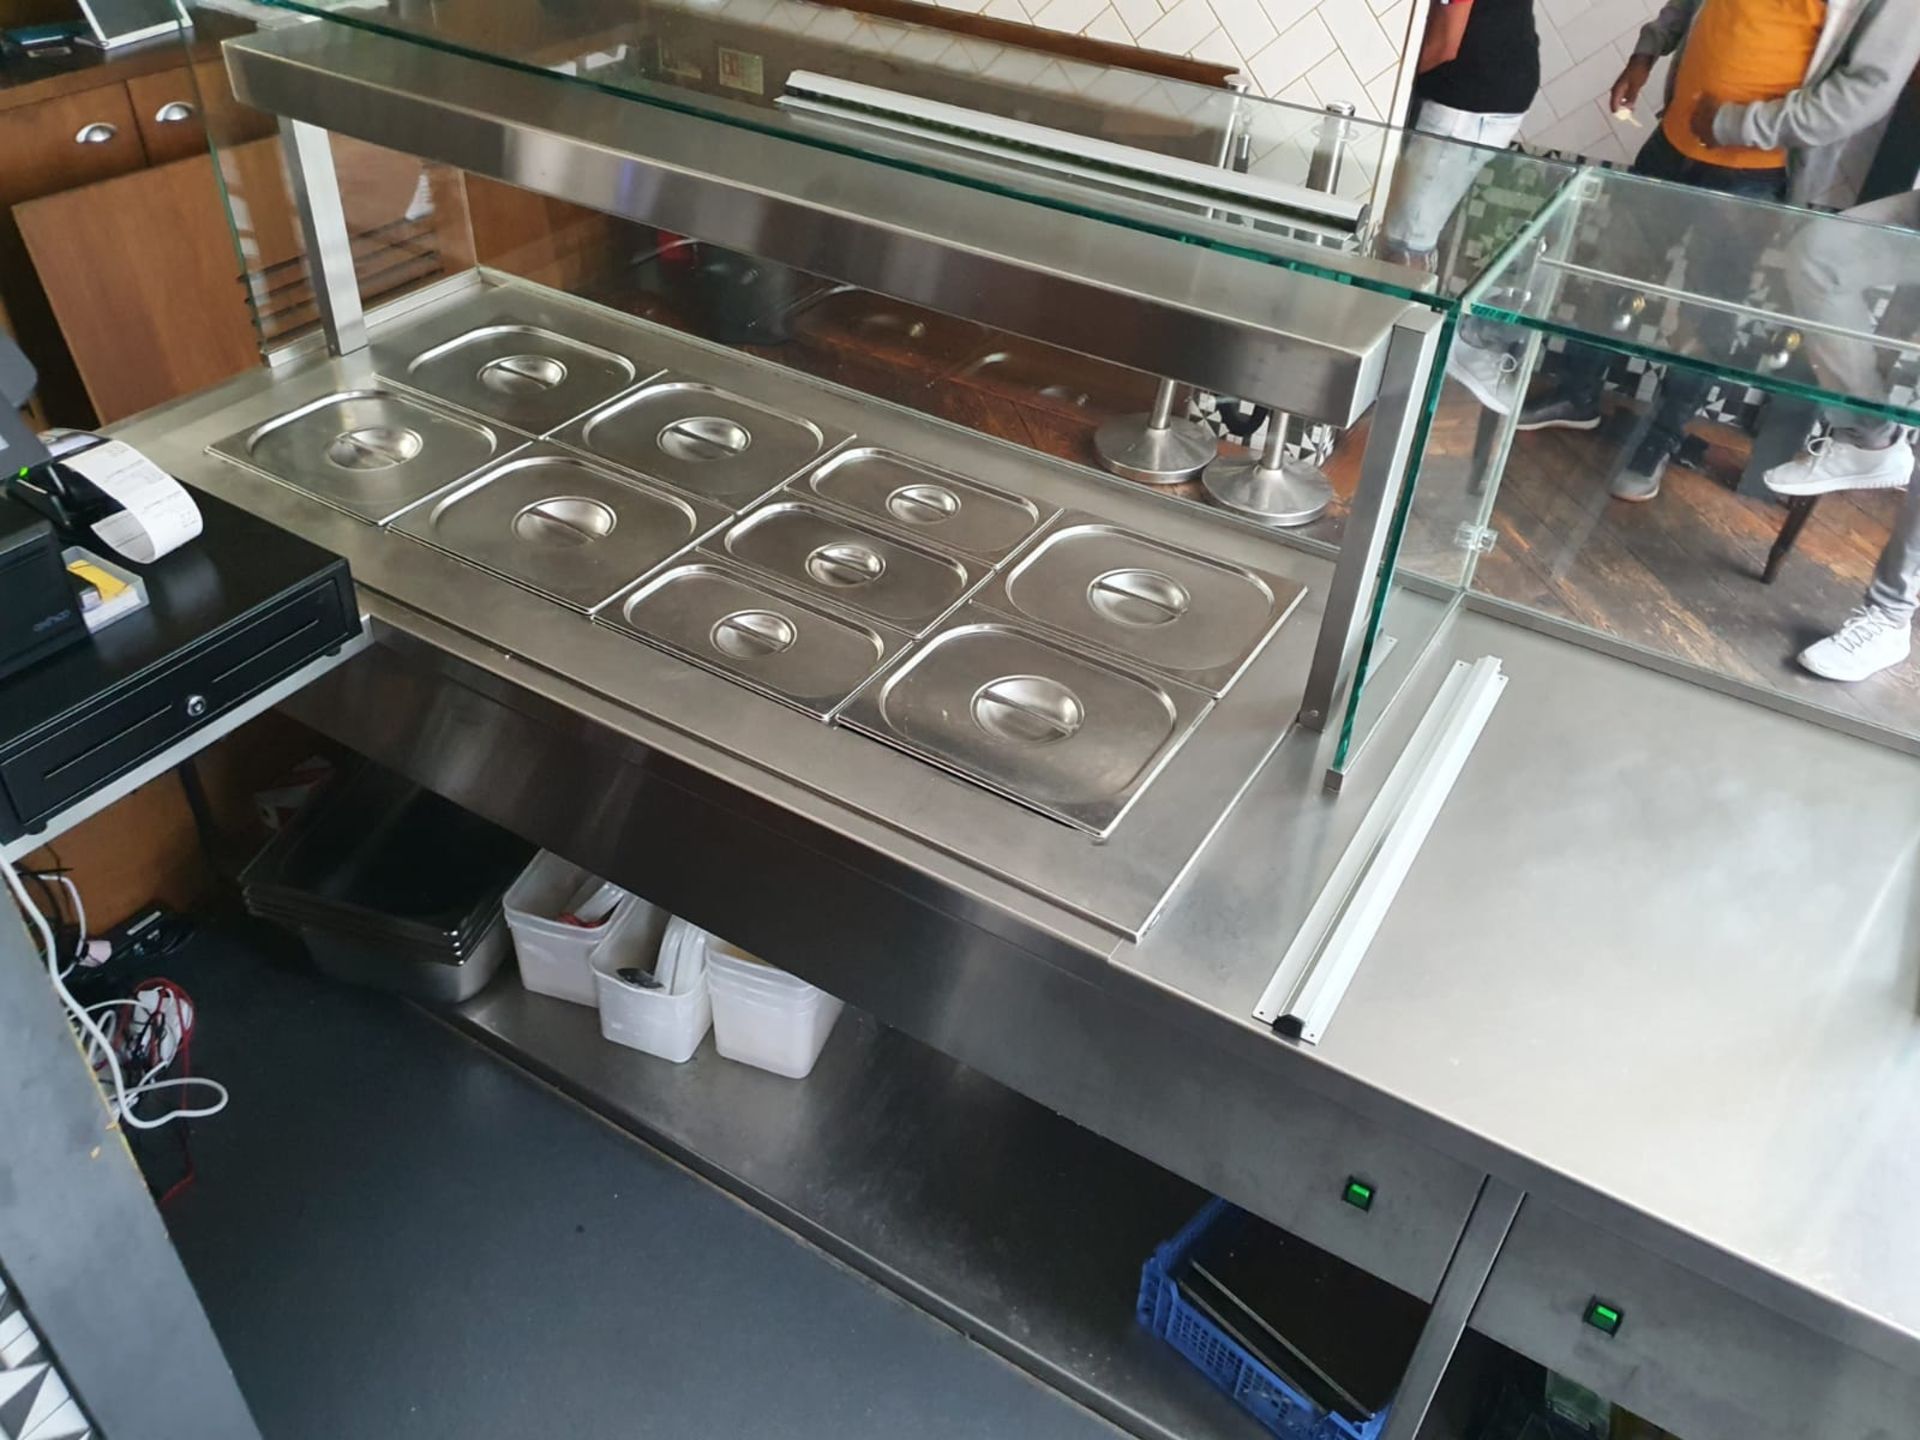 1 x Contemporary Restaurant Service Counter With Walnut Finish, Two Diamond Bain Marie Food - Image 6 of 25